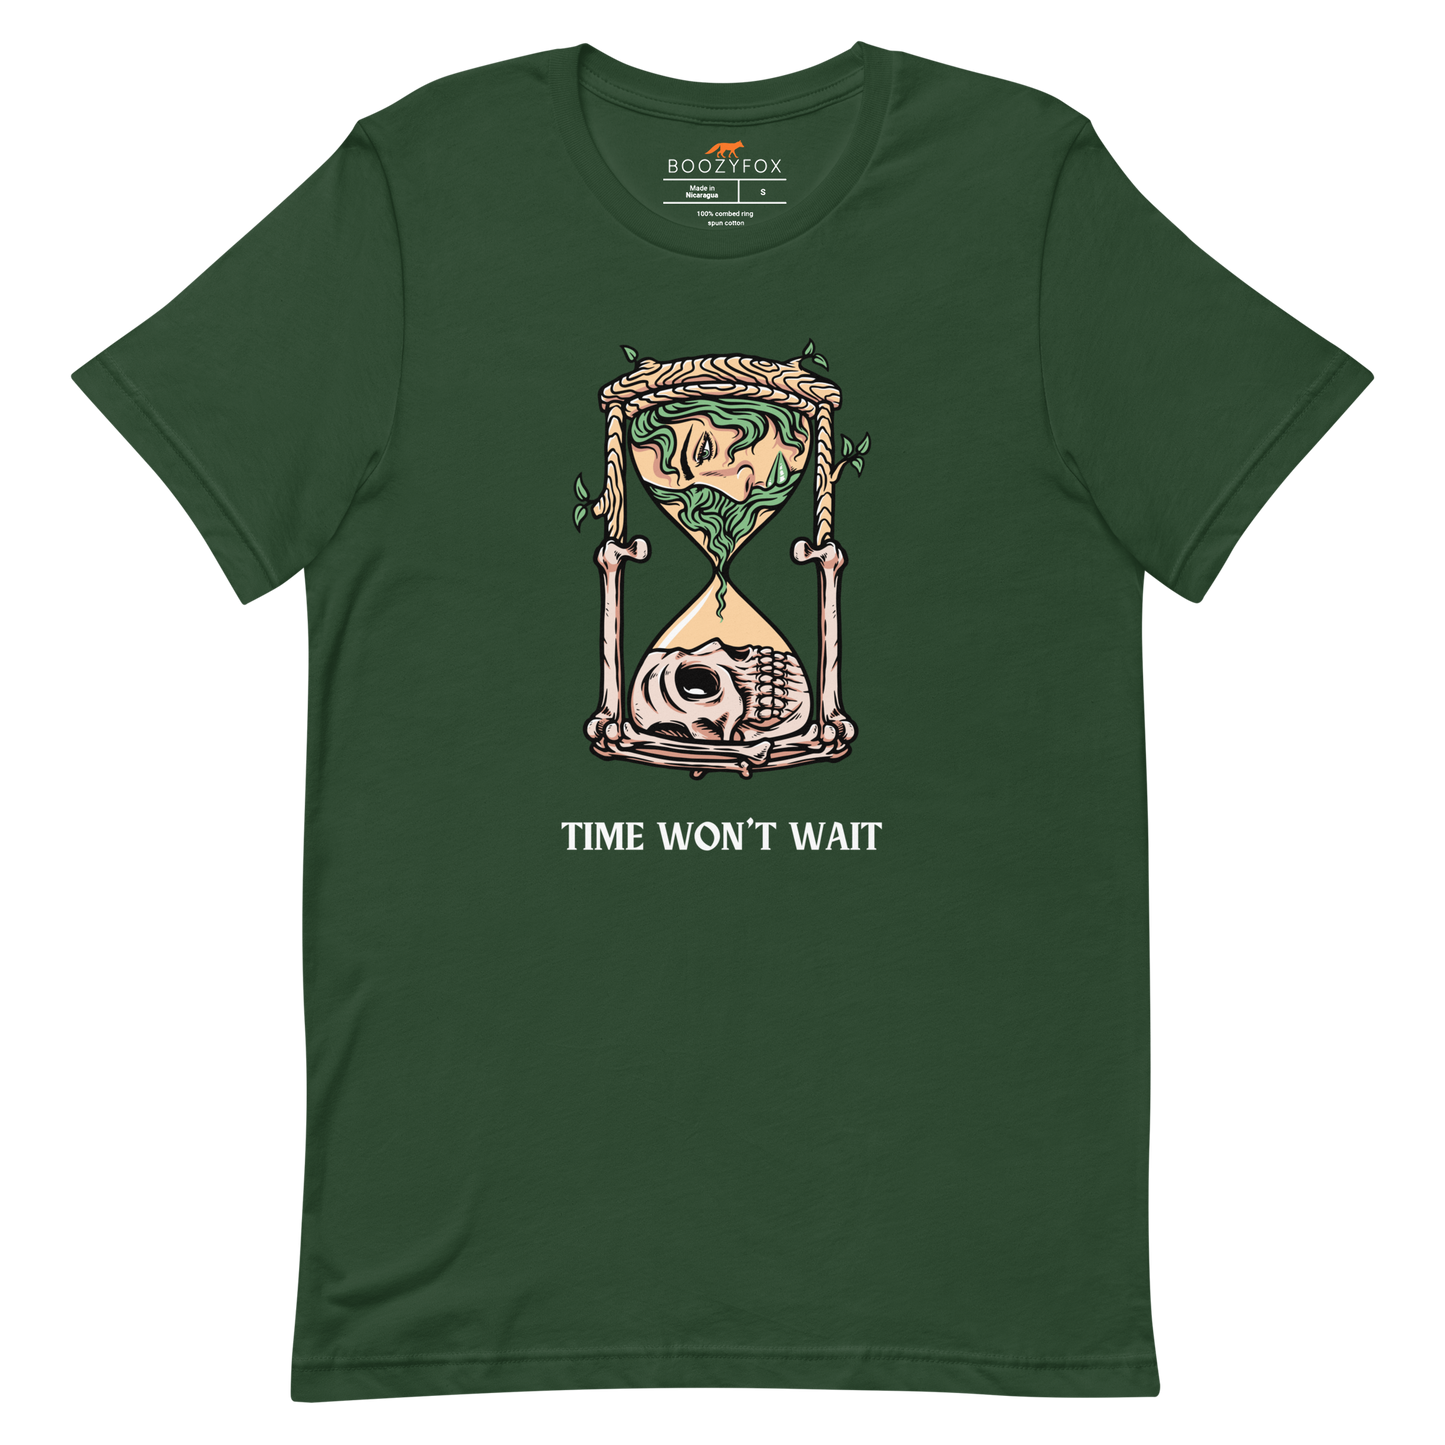 Forest Green Premium Hourglass Tee featuring a captivating Time Won't Wait graphic on the chest - Cool Graphic Hourglass Tees - Boozy Fox